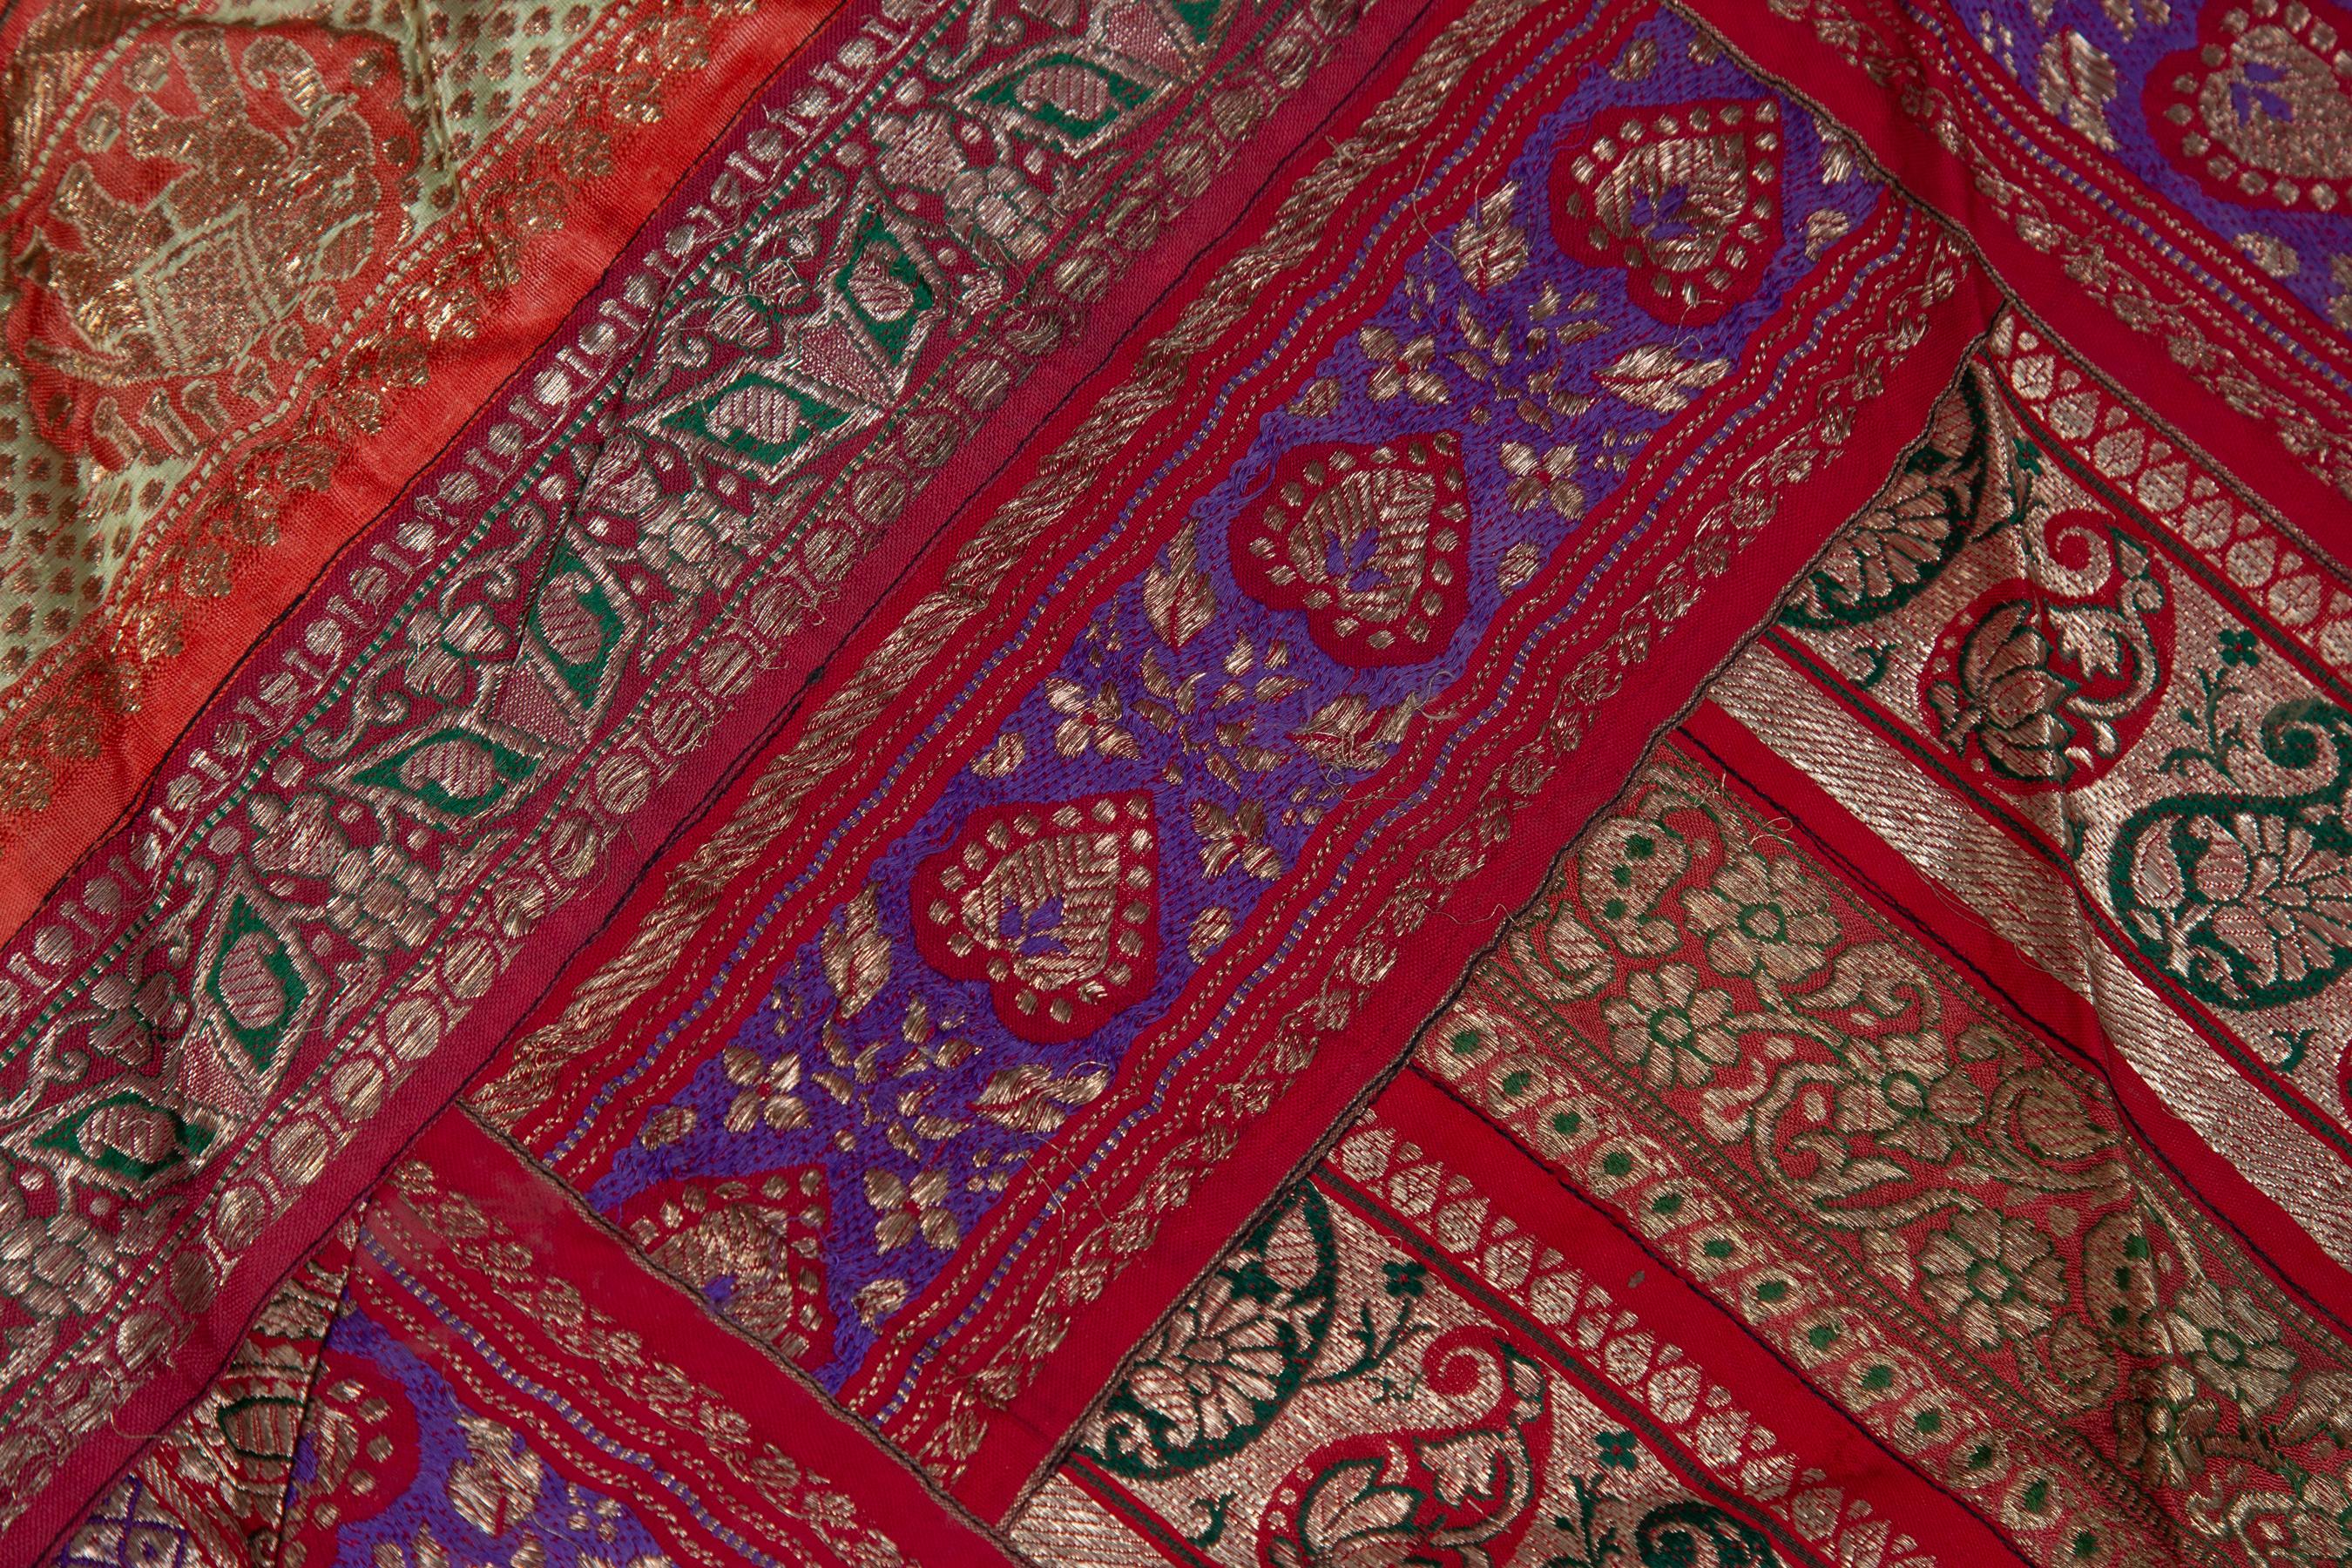 Vintage Indian Silk Embroidered Fabric with Red, Orange, Purple and ...